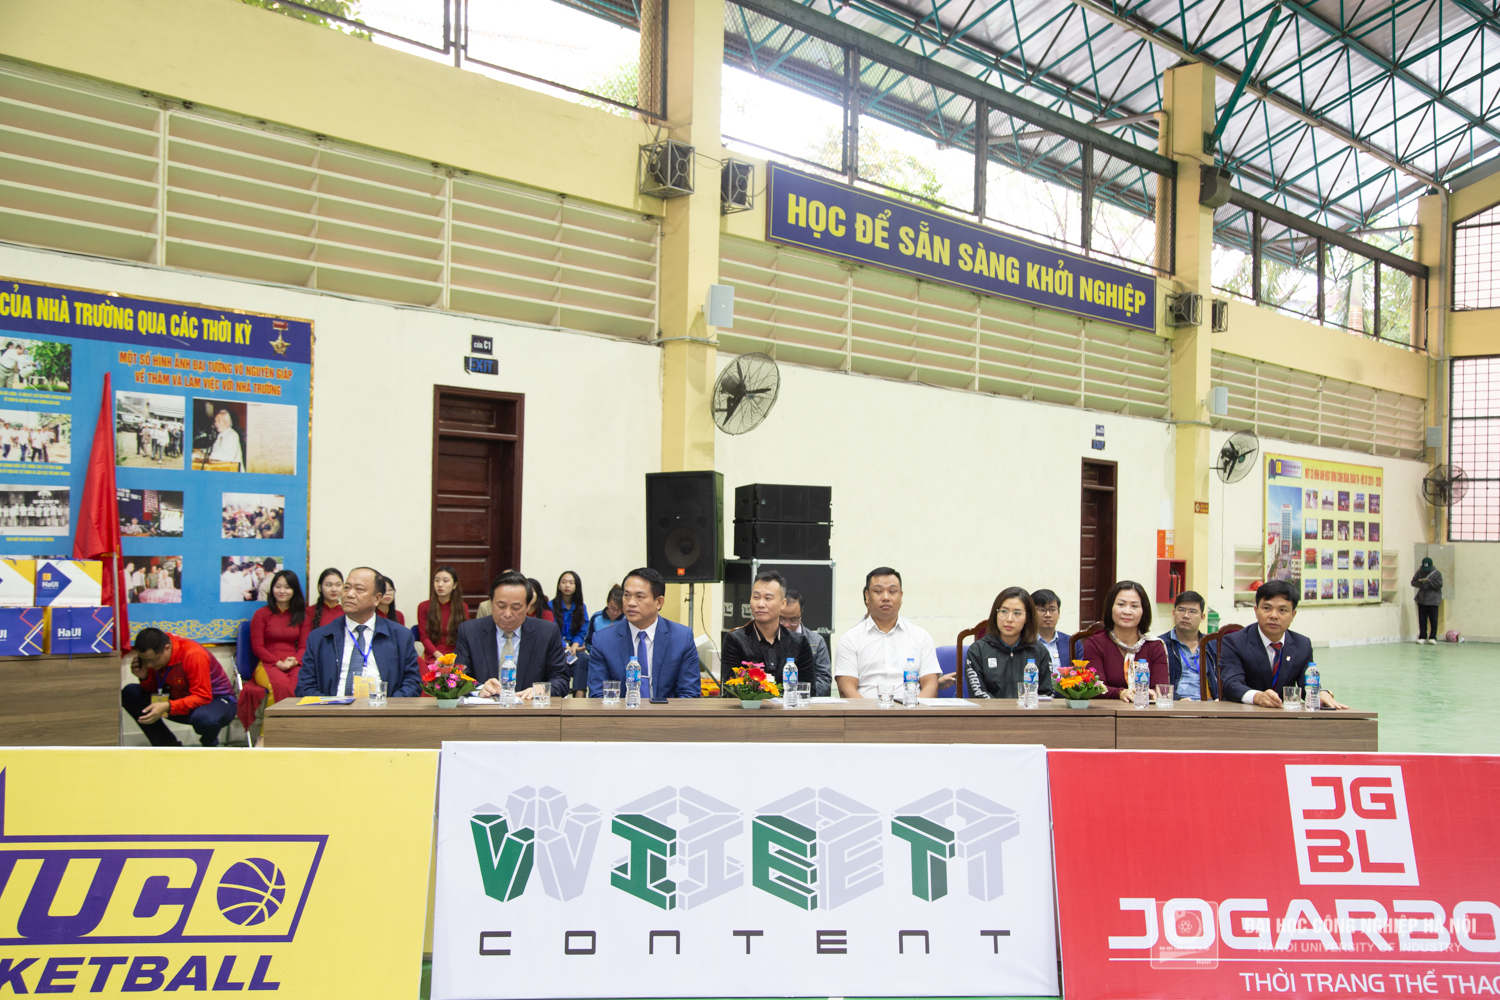 Opening ceremony of The National University Championship basketball tournament in 2022, Northern region took place at Hanoi University of Industry